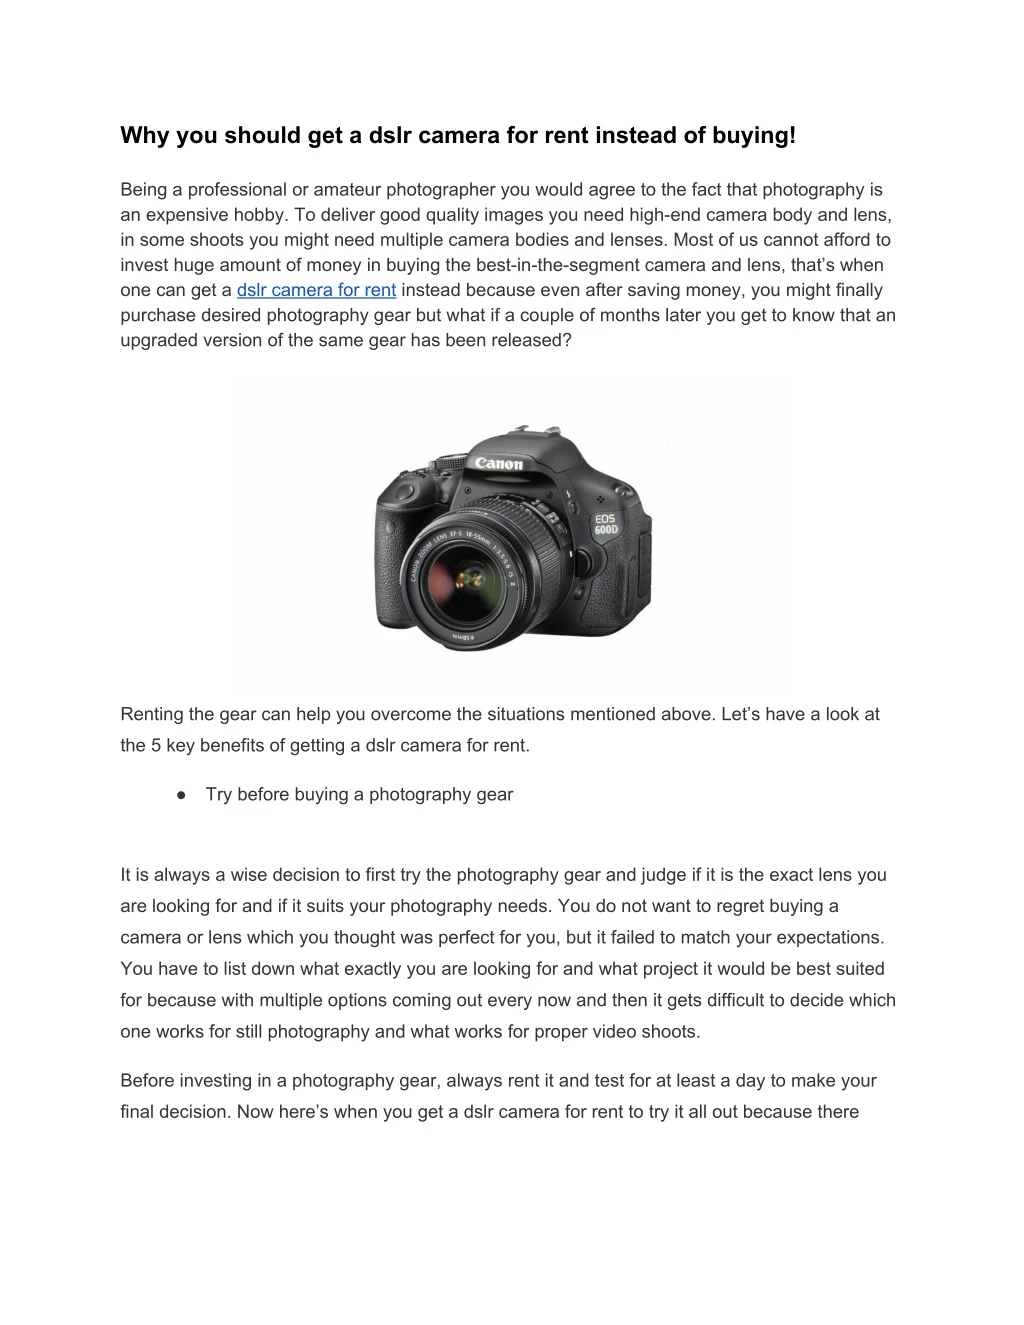 why you should get a dslr camera for rent instead